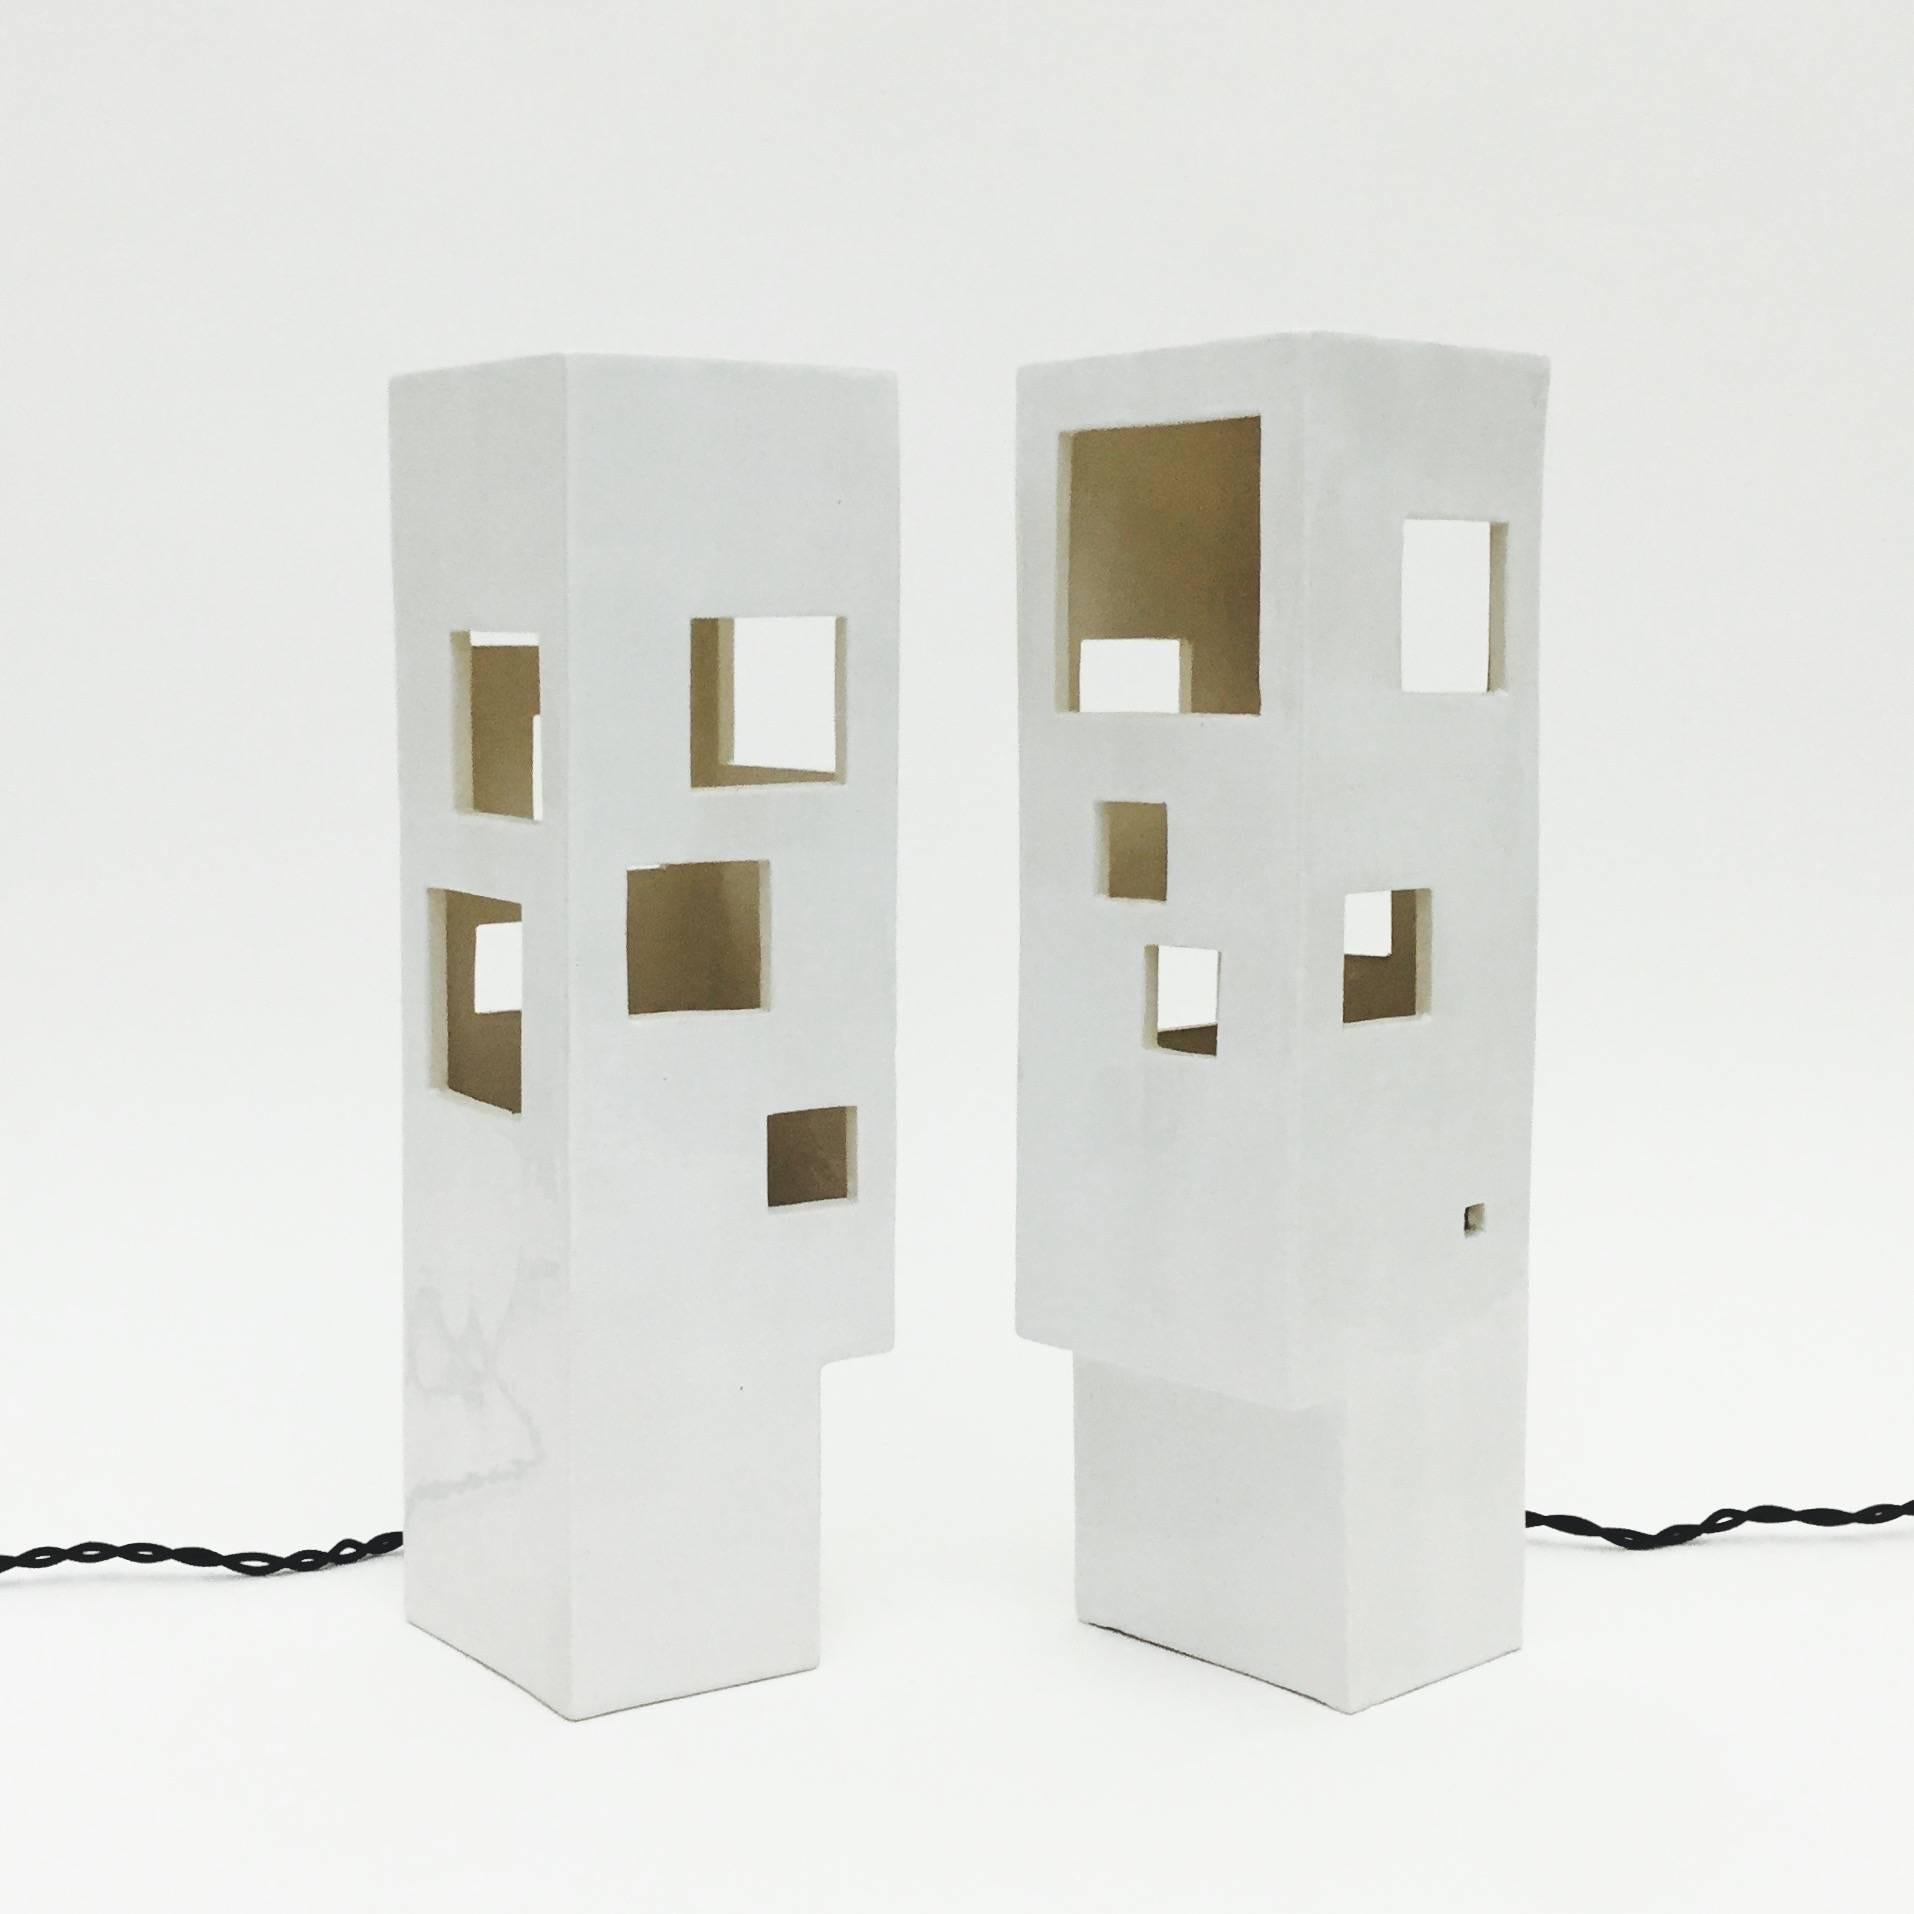 Architectural and geometric ceramic pieces, forming table lamps, hand-crafted and designed as a tribute to a modernist and Minimalist structure.

Ceramic partially glazed in glossy milky white, perforated with squares and rectangles cuts, light